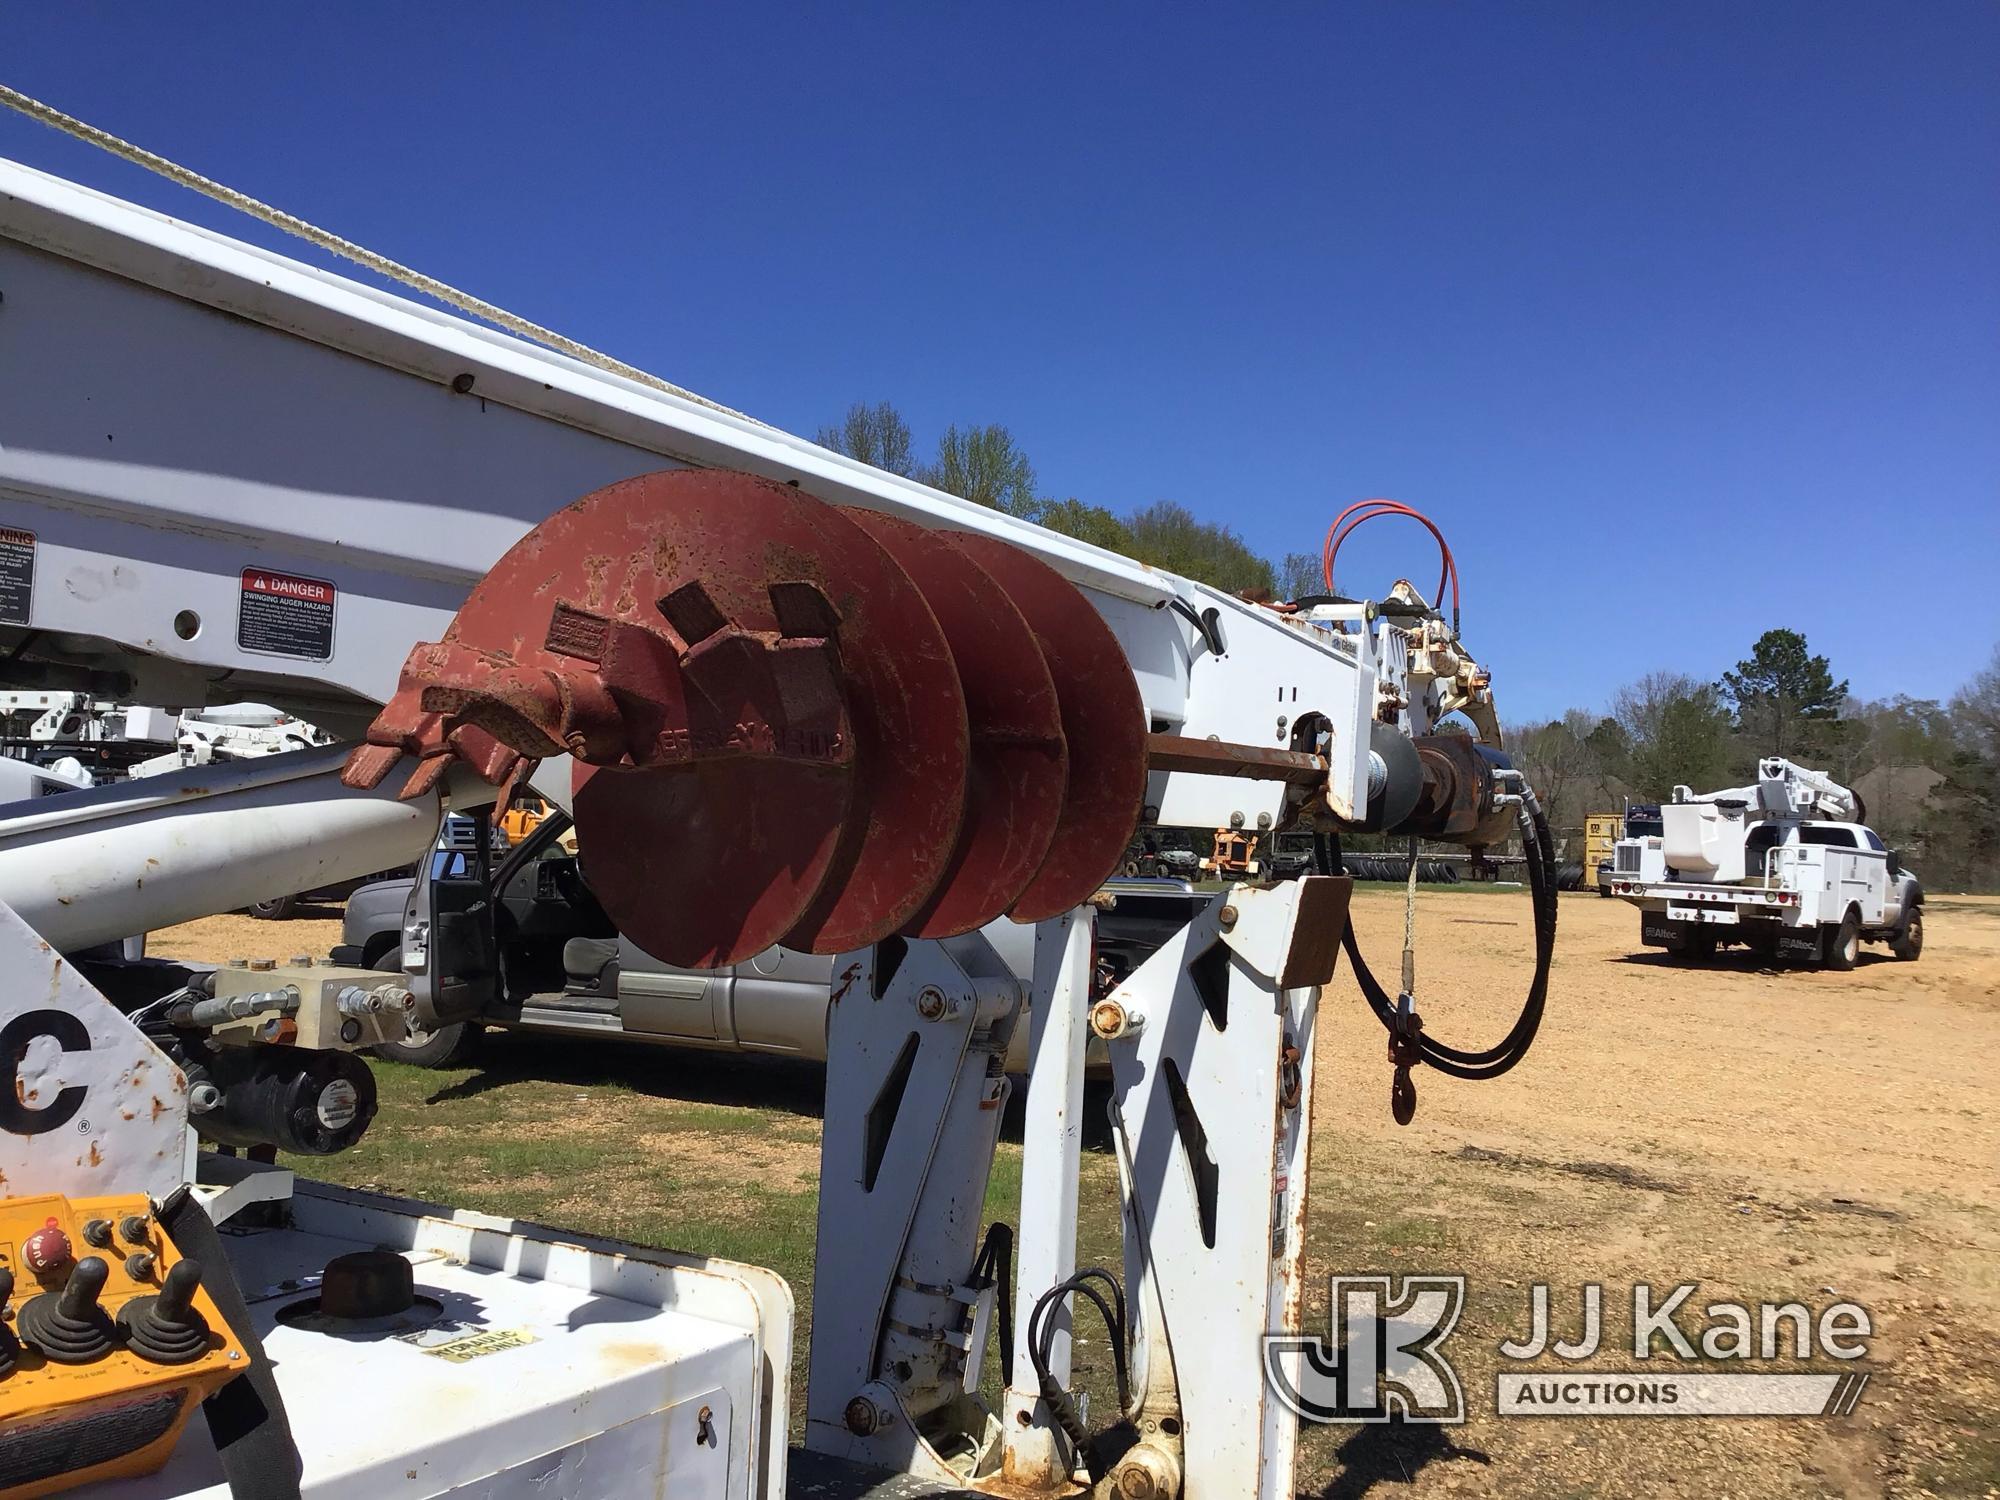 (Byram, MS) Altec DB37 Jump to Start, Turns Over Will Not Start, All Conditions Unknown, Throttle Le